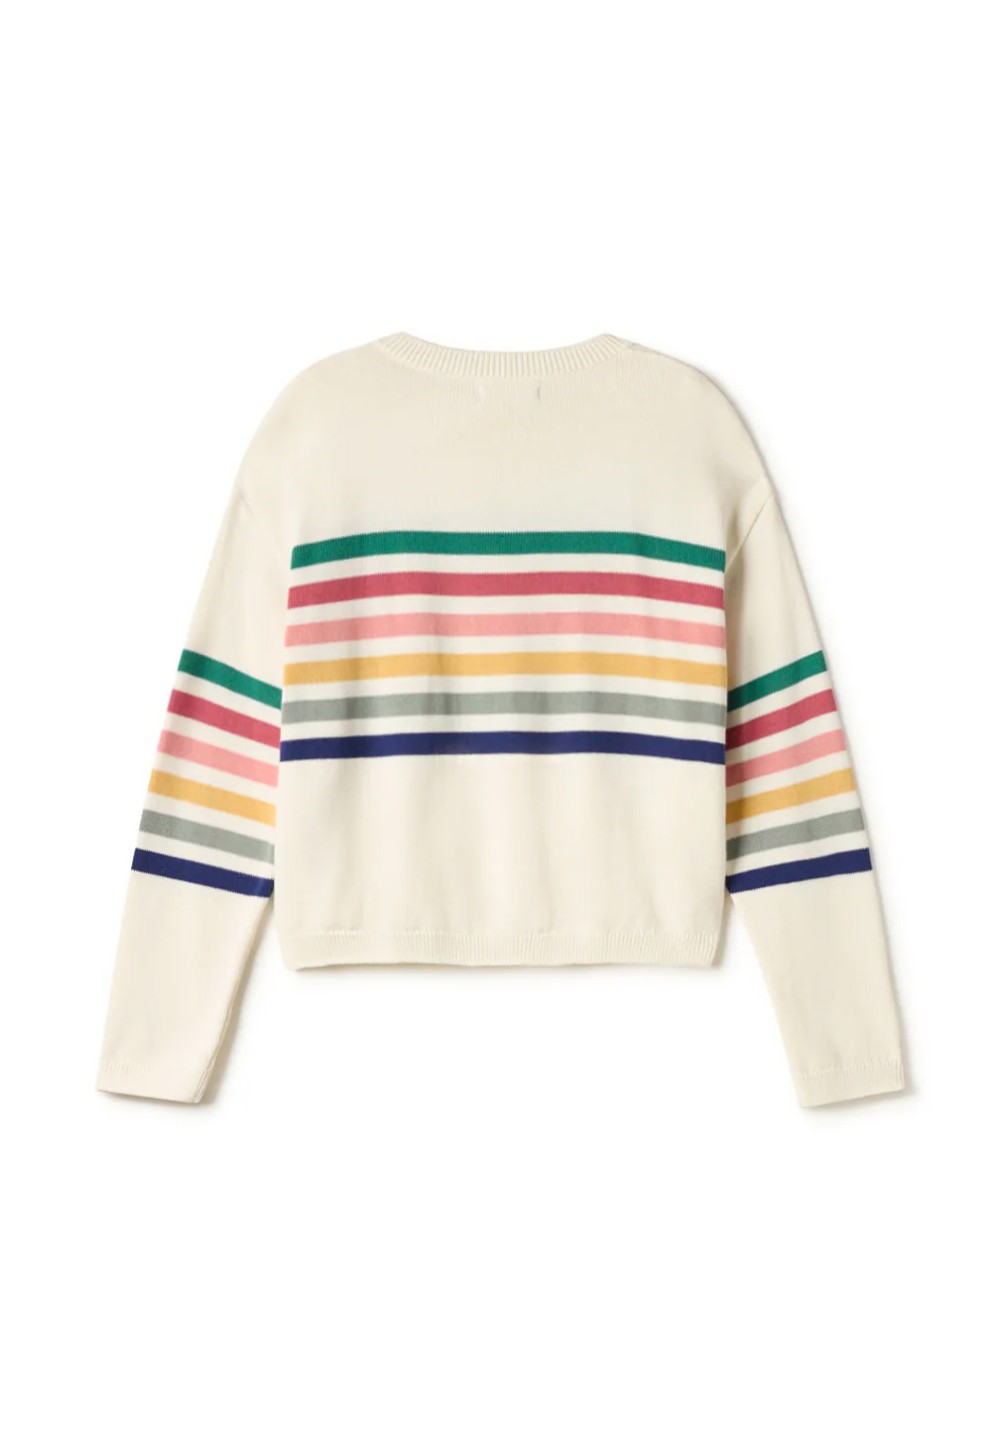 Twothirds - Pullover Padda Multicolour Striped